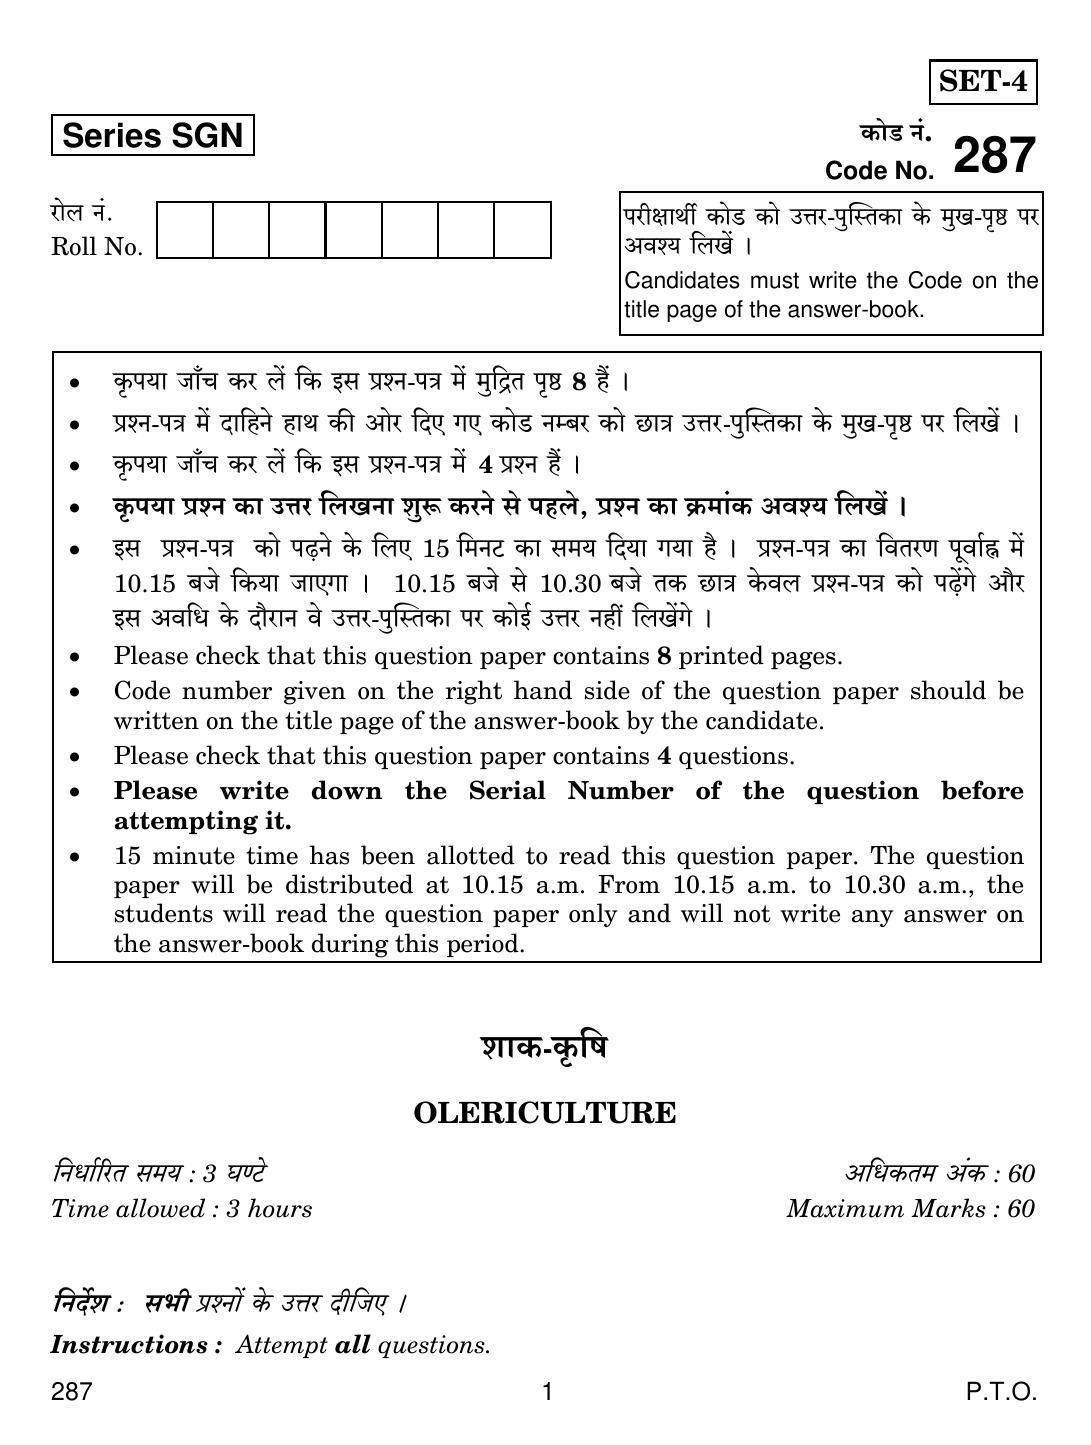 CBSE Class 12 287 OLERICULTURE 2018 Question Paper - Page 1